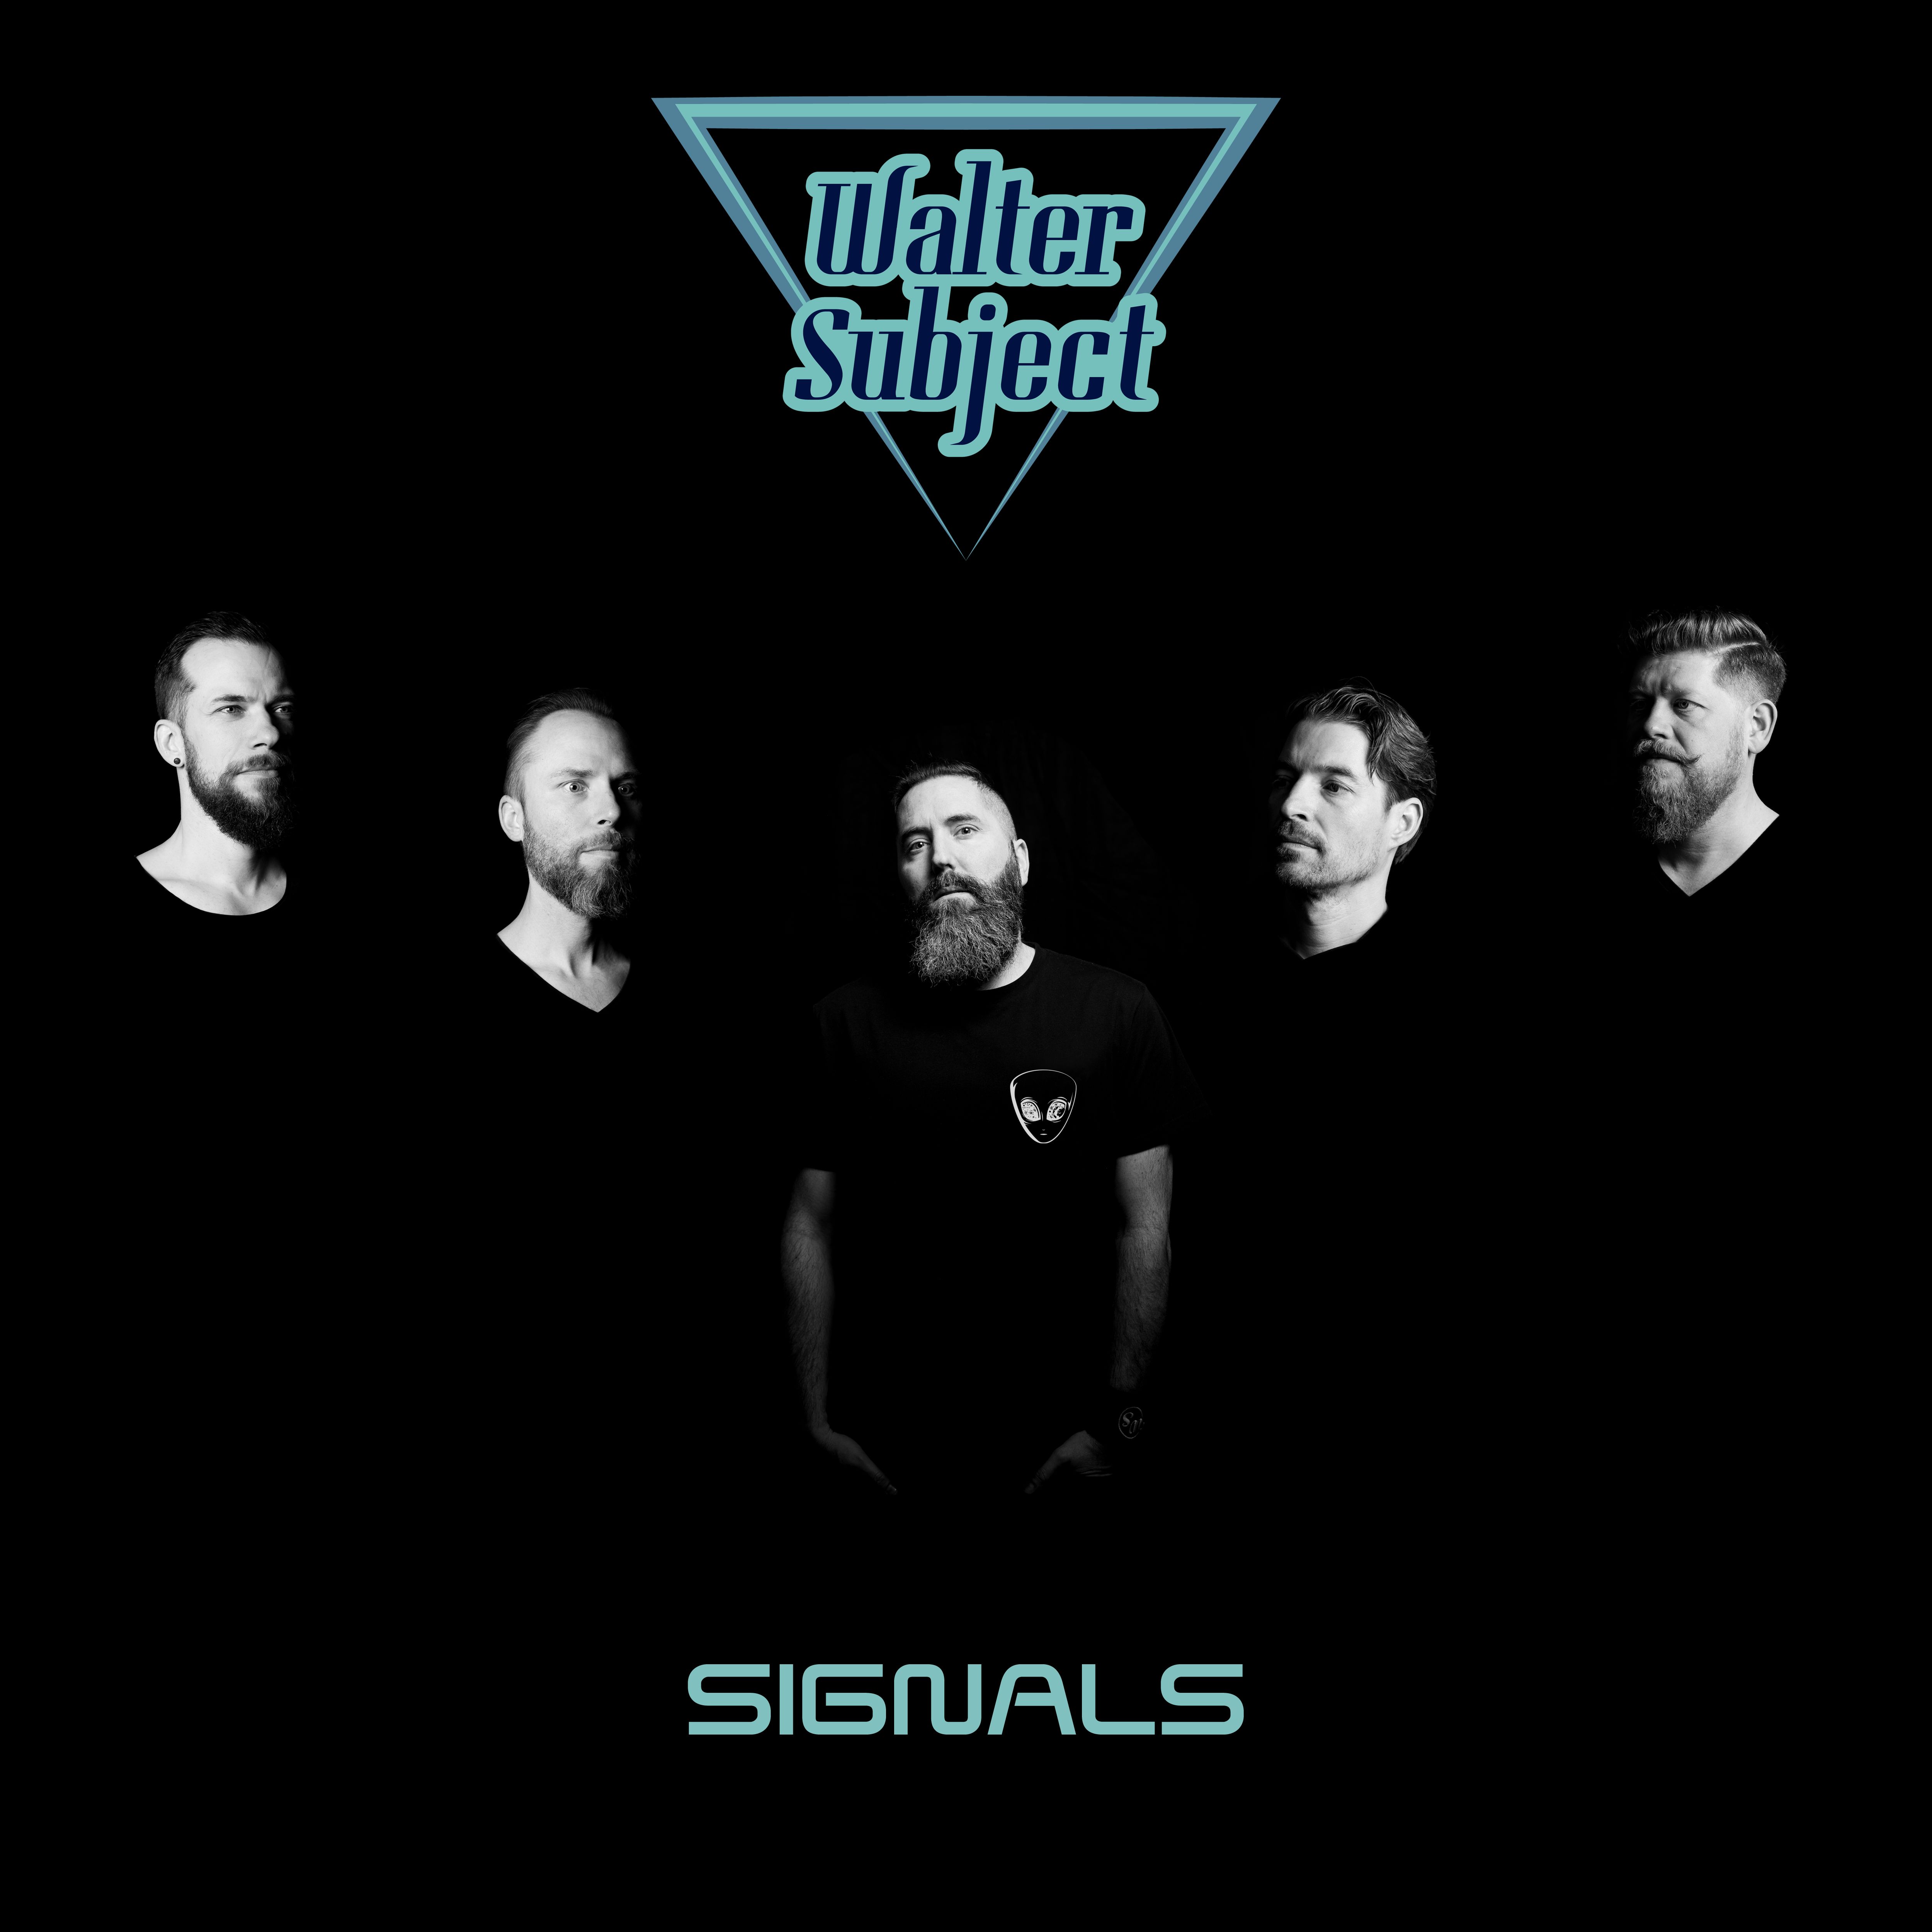 New Single: SIGNALS is now available on all platforms!